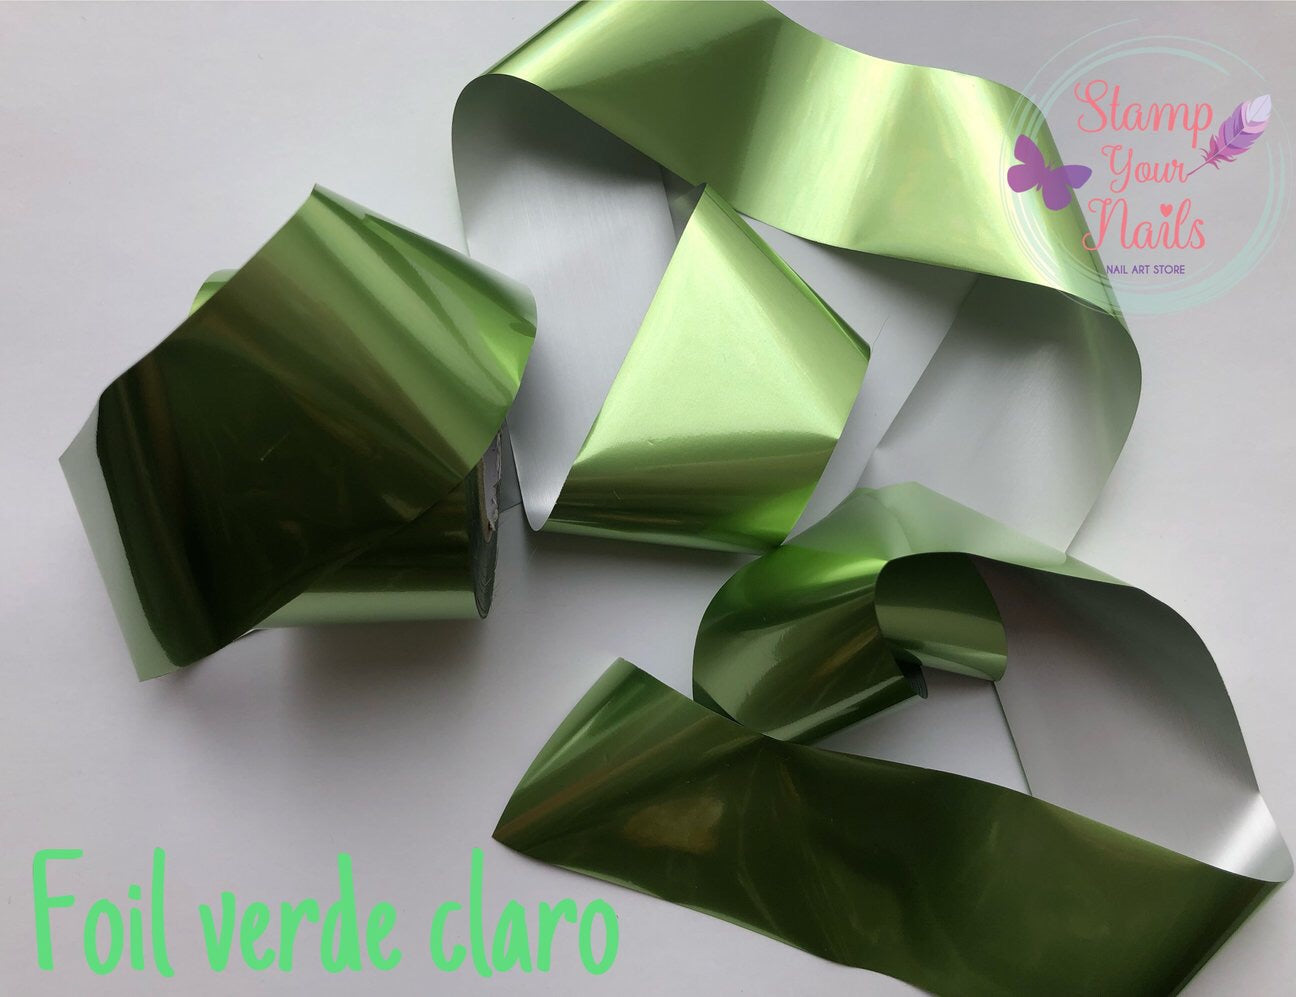 Foil verde claro - Stamp your nails